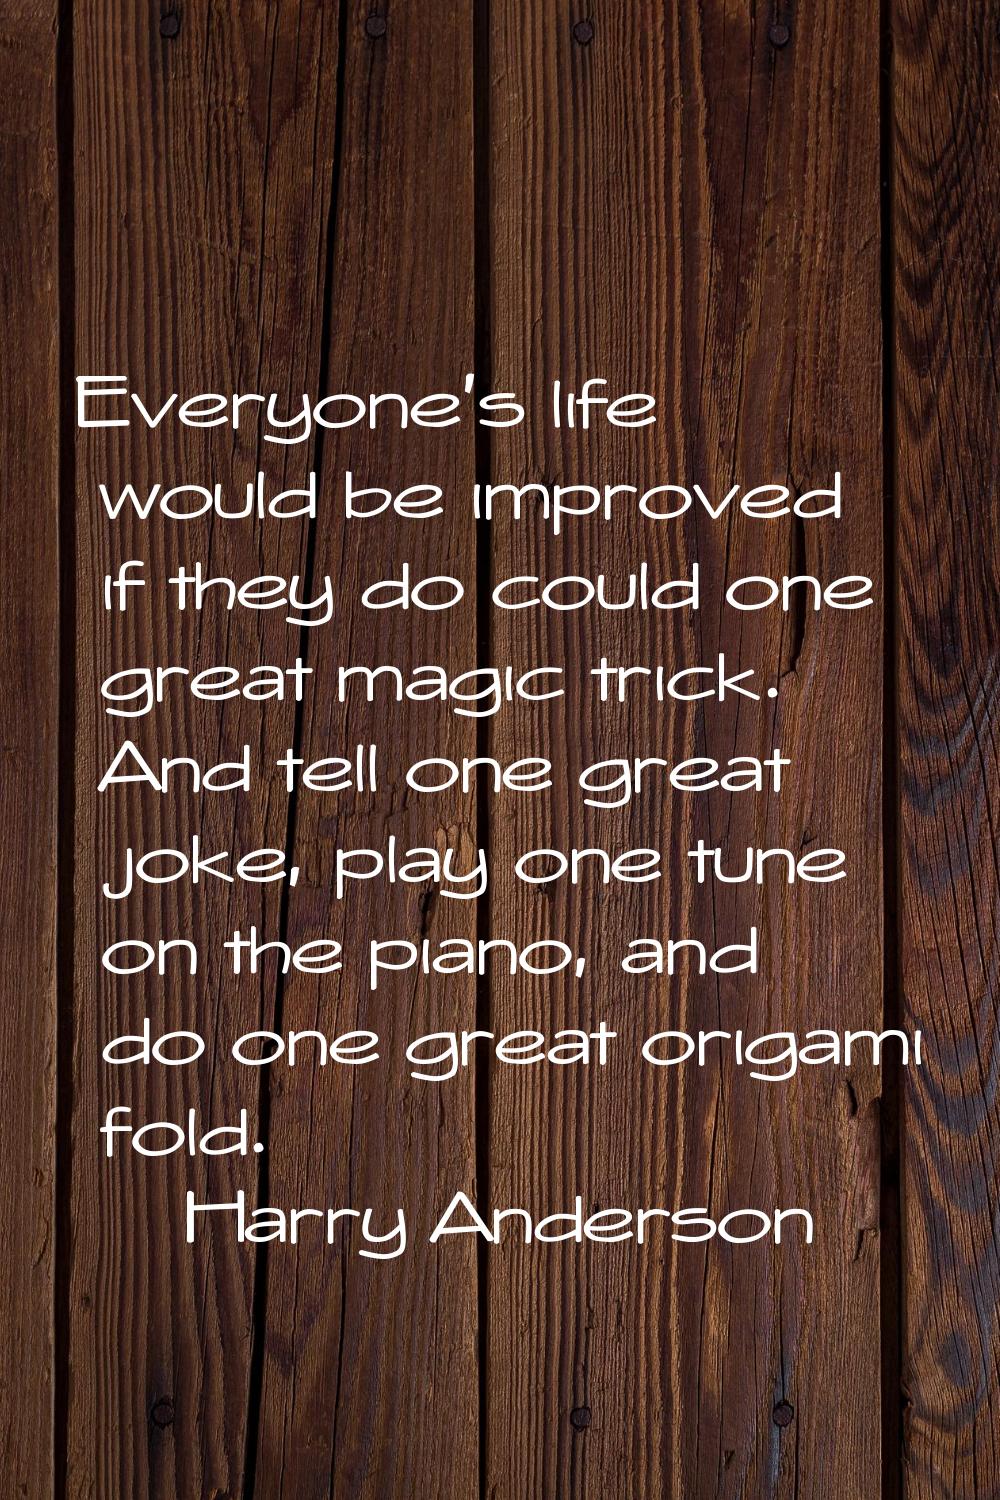 Everyone's life would be improved if they do could one great magic trick. And tell one great joke, 